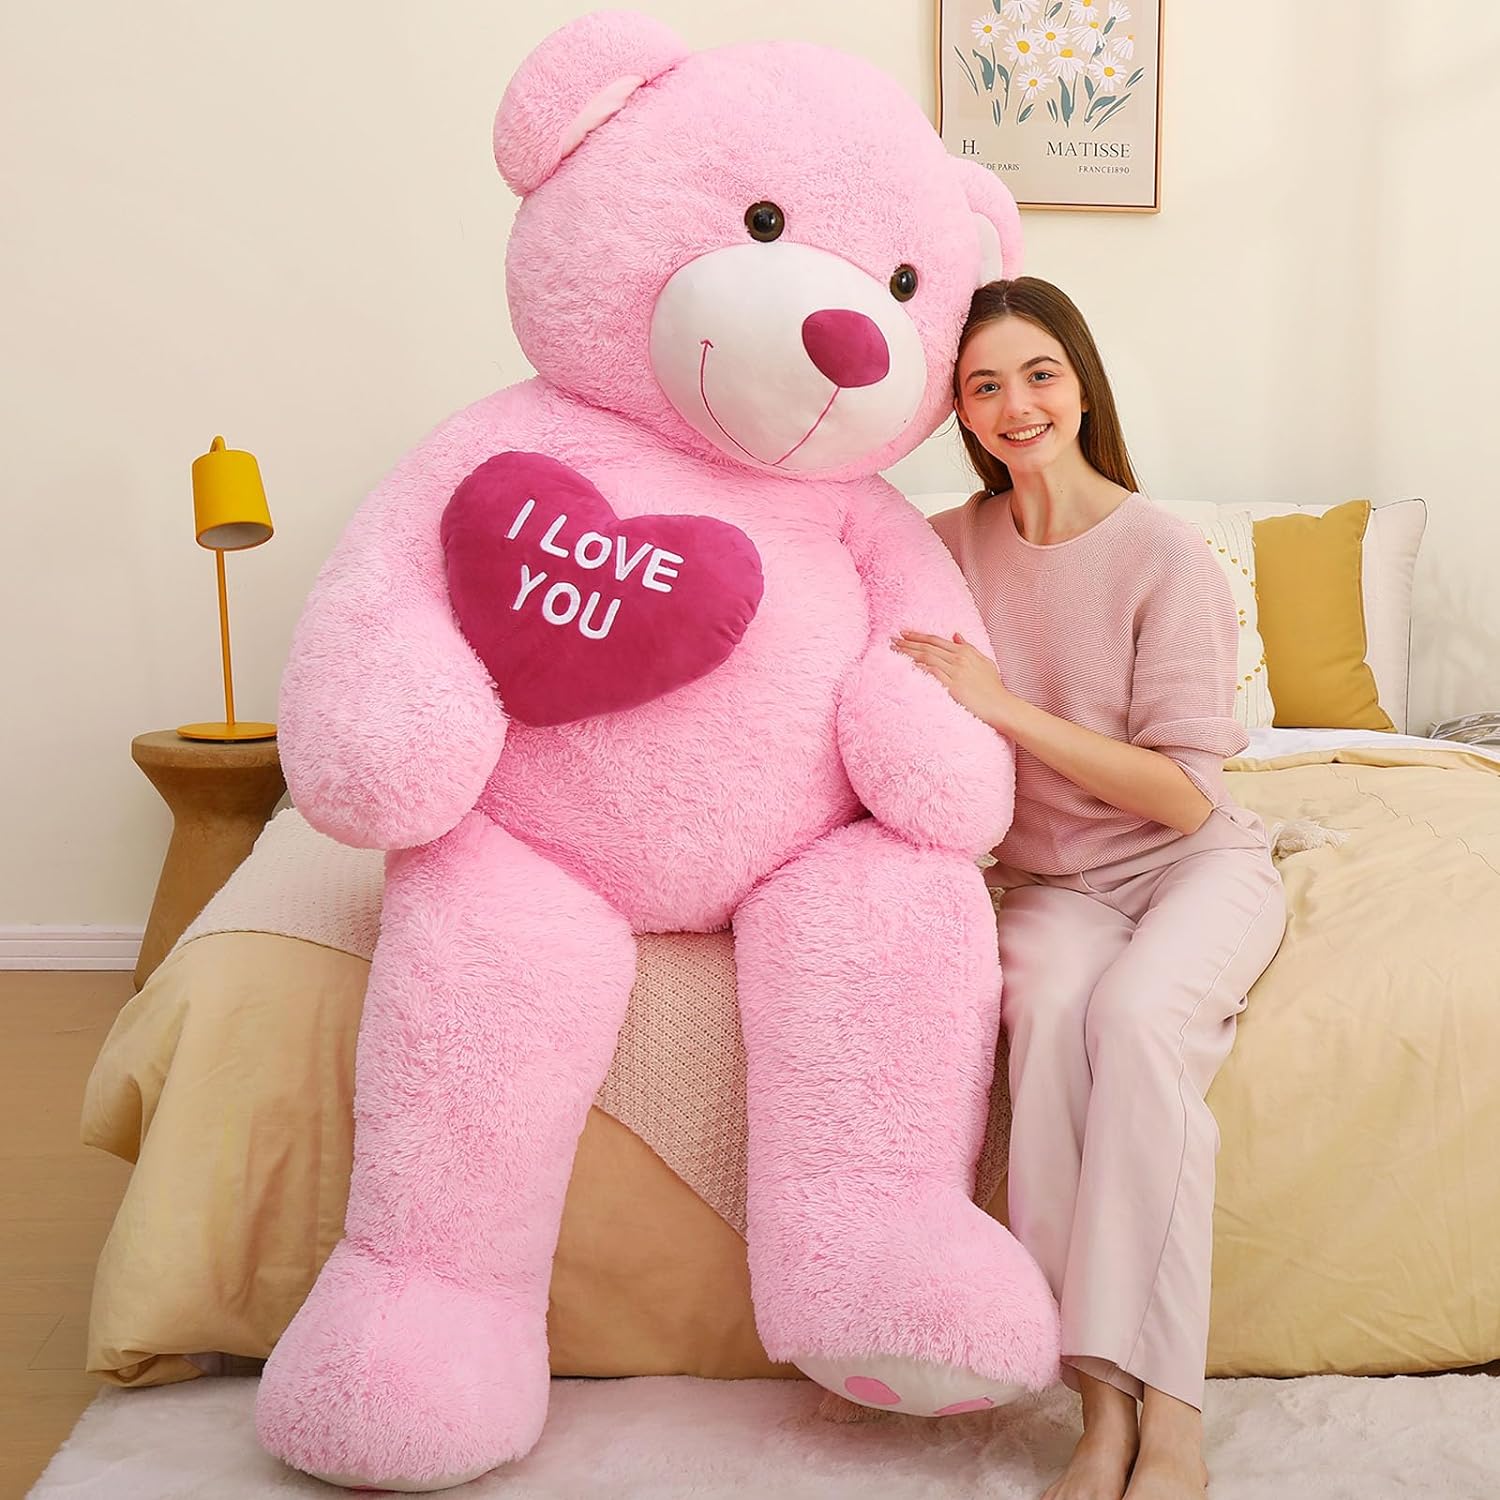 Life Size Teddy Bear Plush Toy, Brown/Beige/Pink, 6 FT